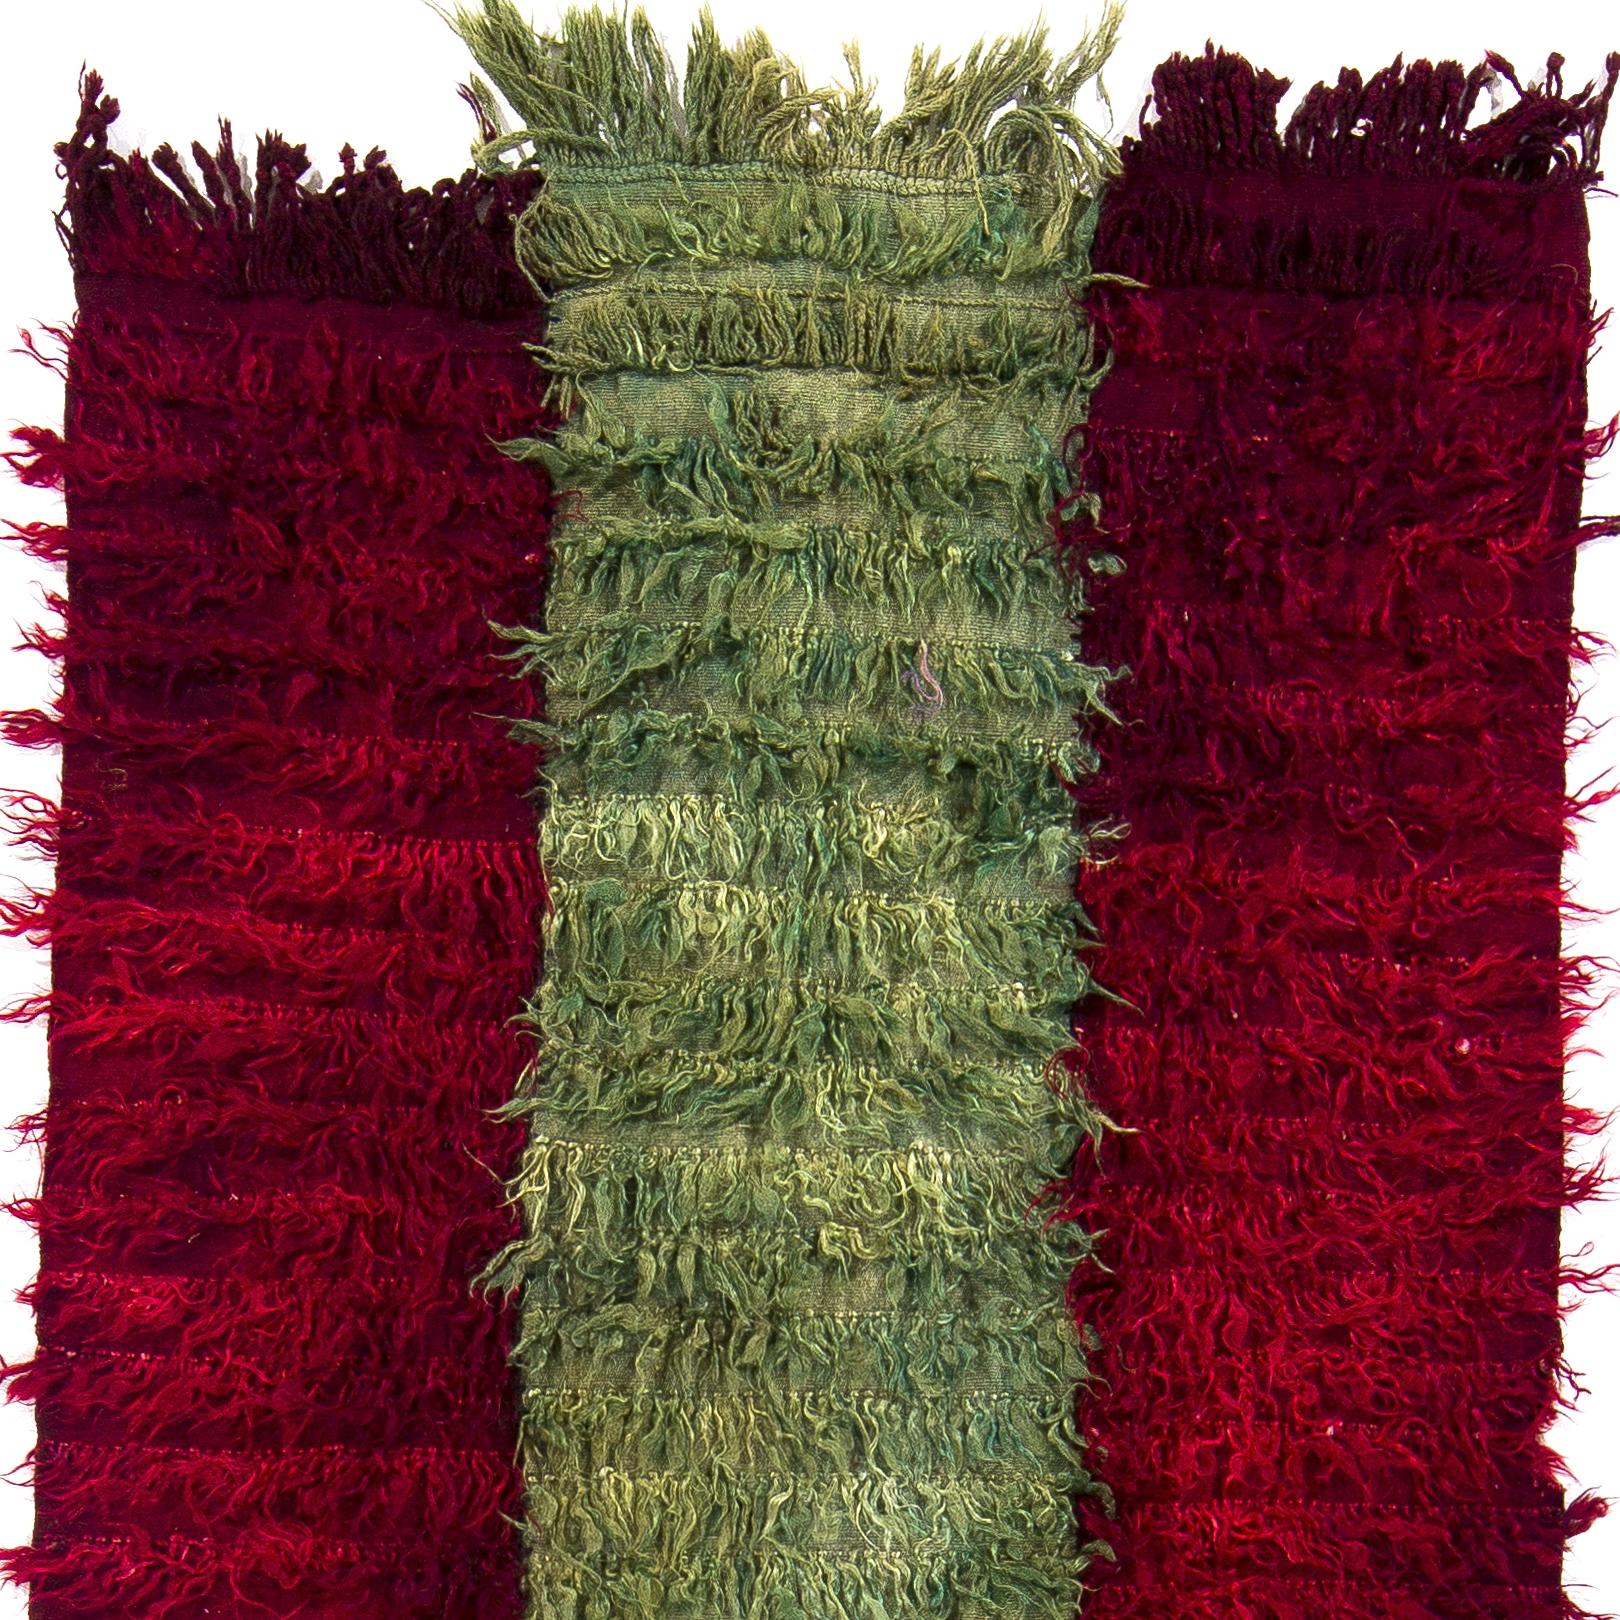 Turkish 4.7x11.2 Ft Vintage Filikli Tulu Rug Made of Mohair Wool, Red and Green Colors For Sale